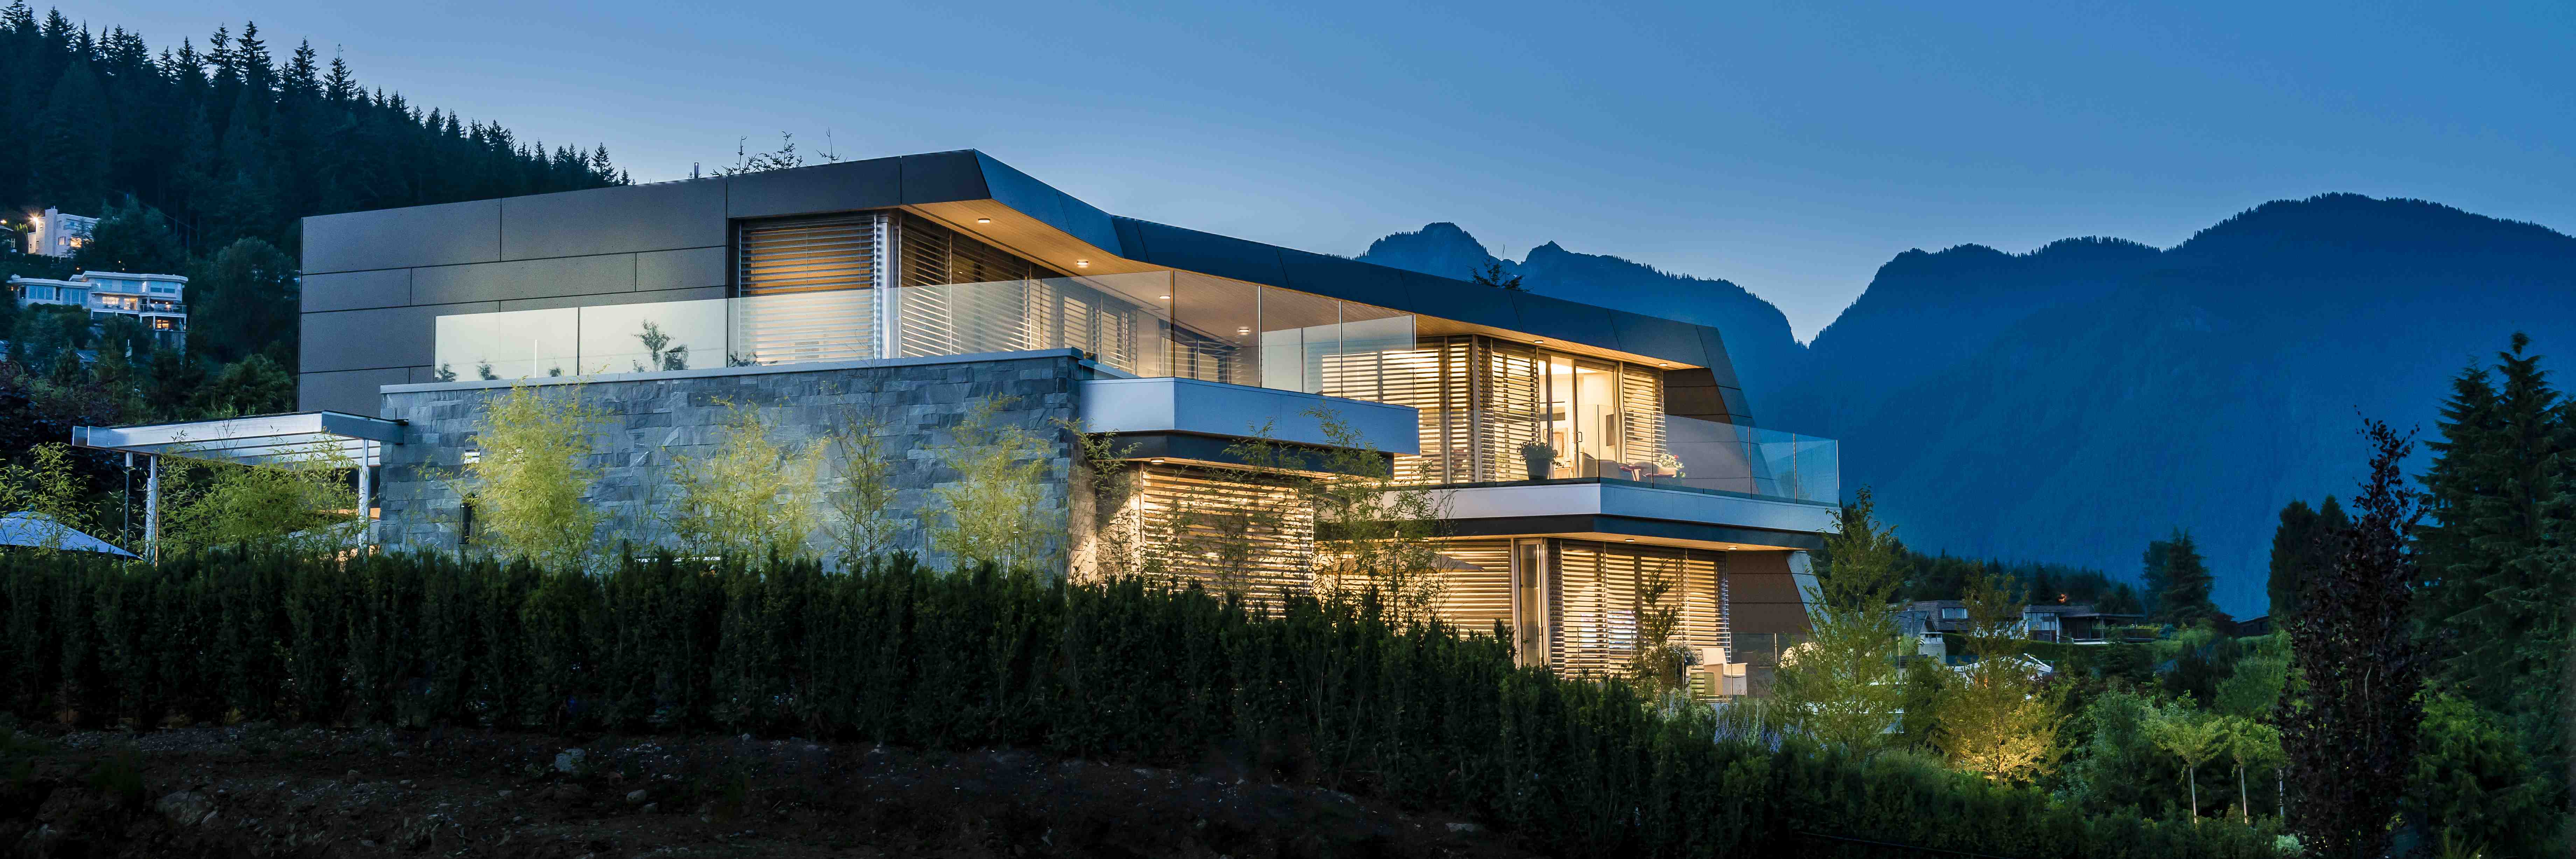 Iredale Group Architecture home in West Vancouver